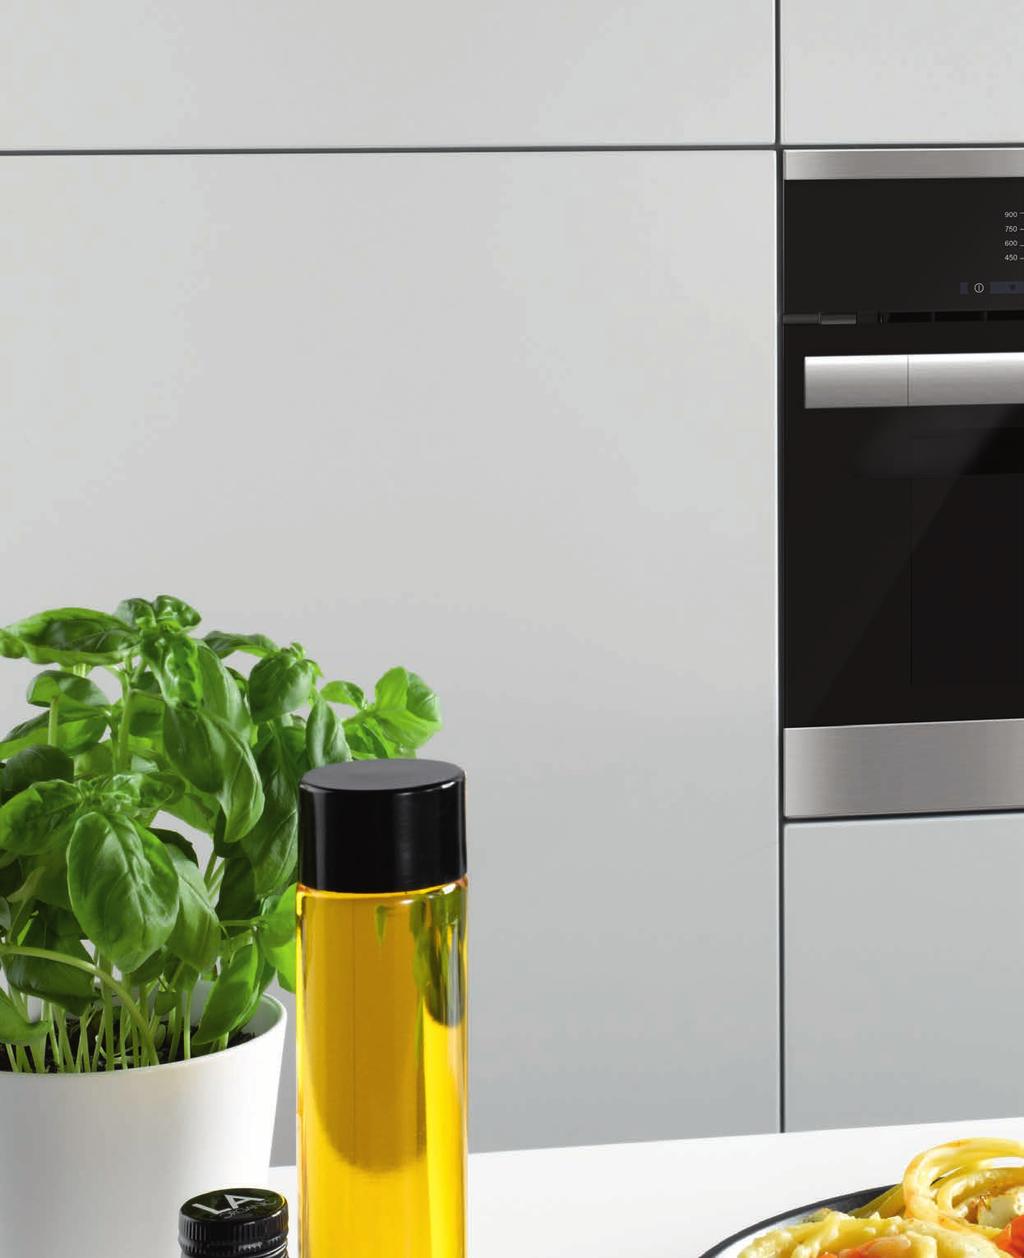 As Individual as Your Taste Technology Meets Style Miele Built-In TopControl Microwave Miele microwave ovens, with controls